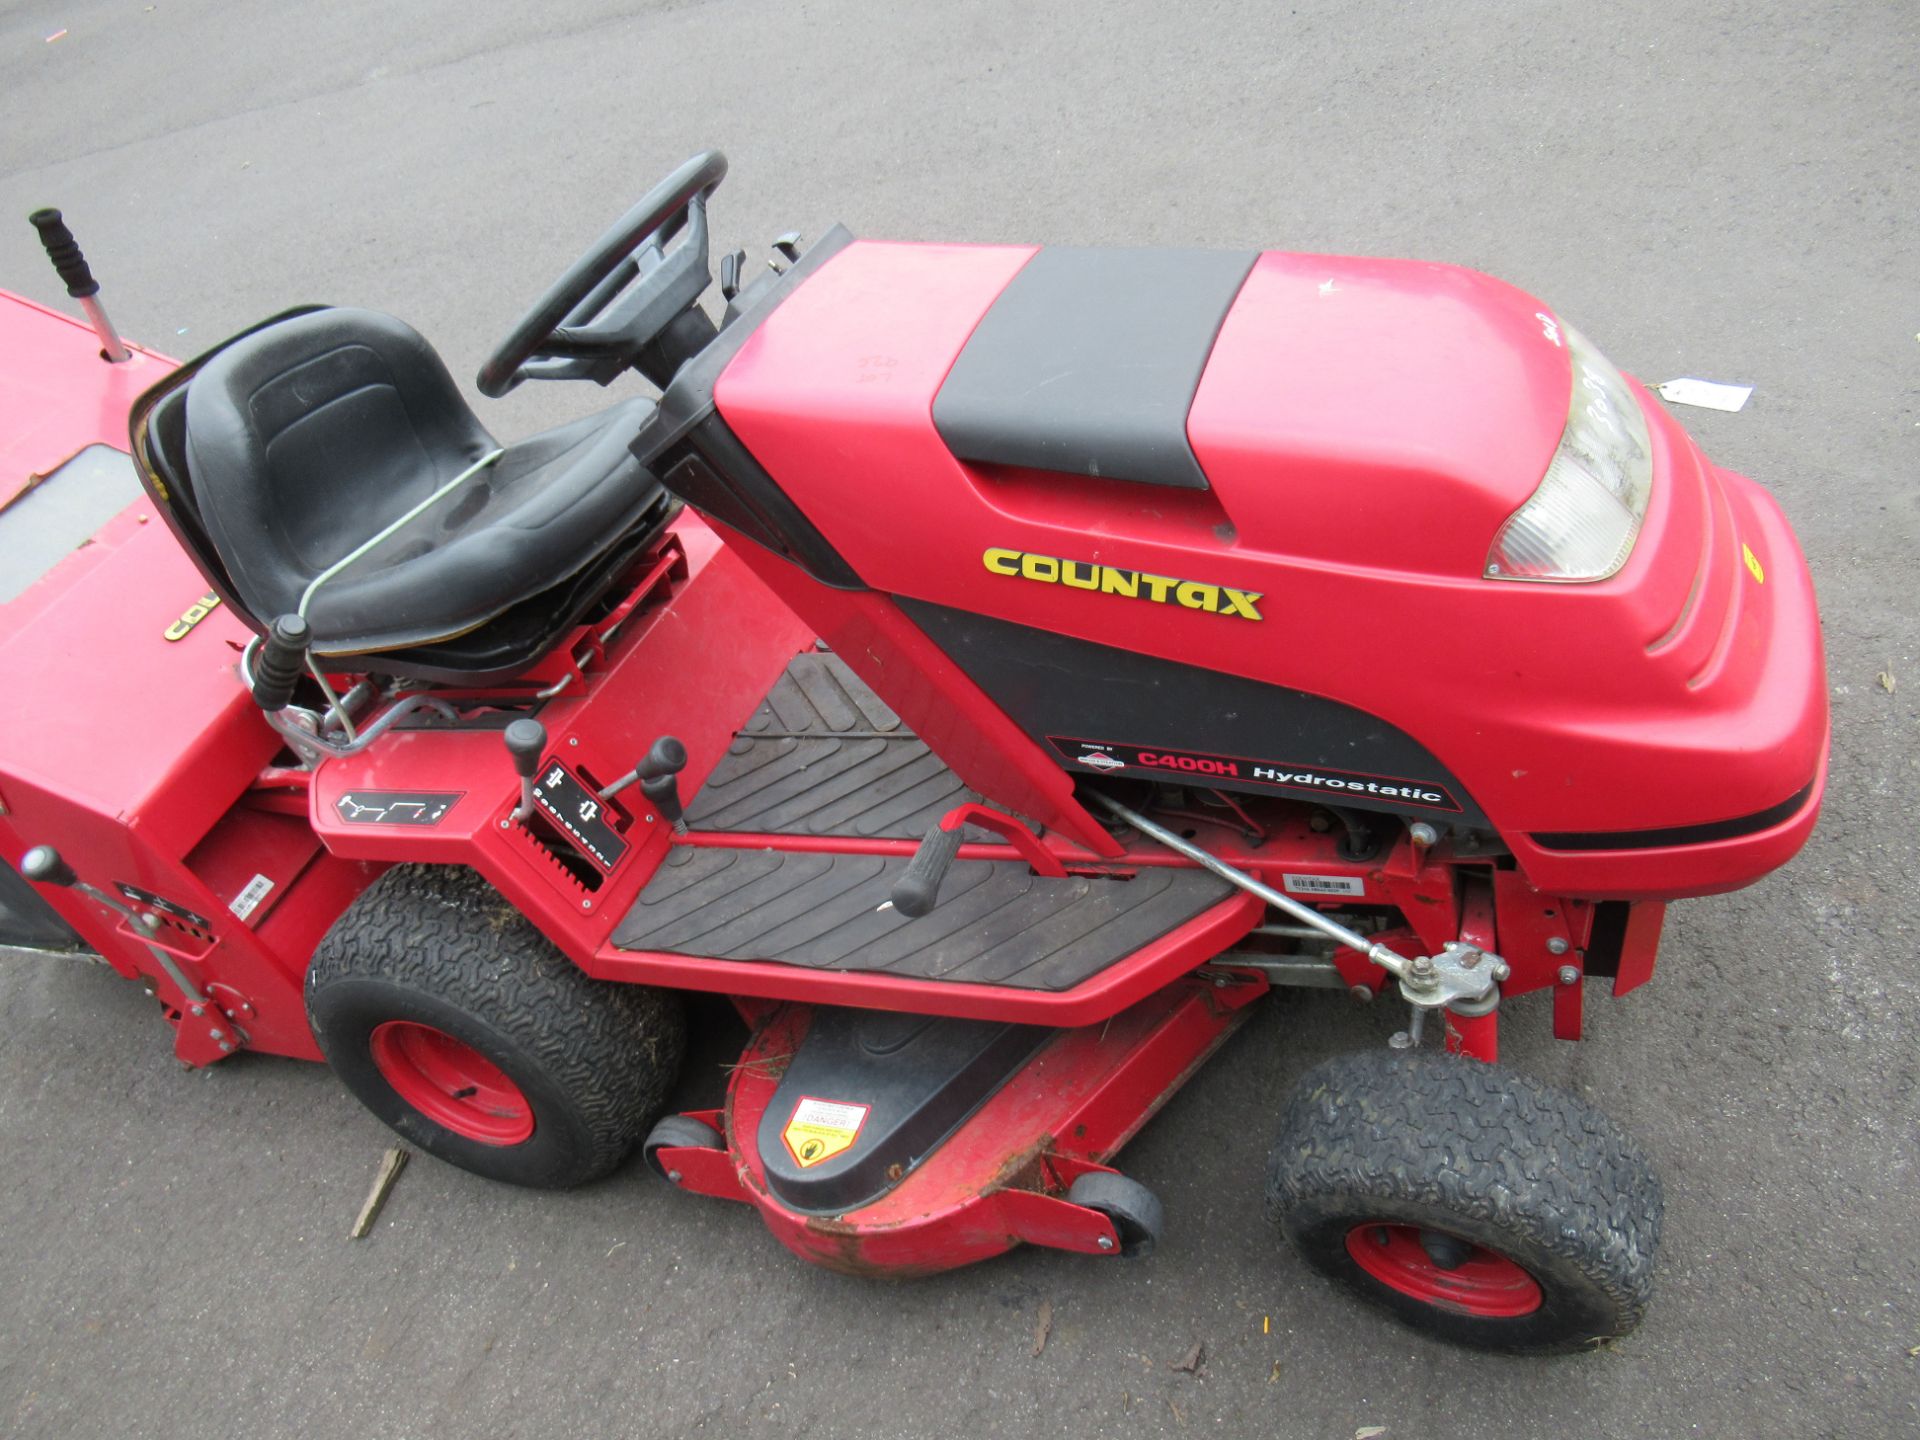 Countax Hydrostatic C400H Ride-On Lawnmower - Image 6 of 10